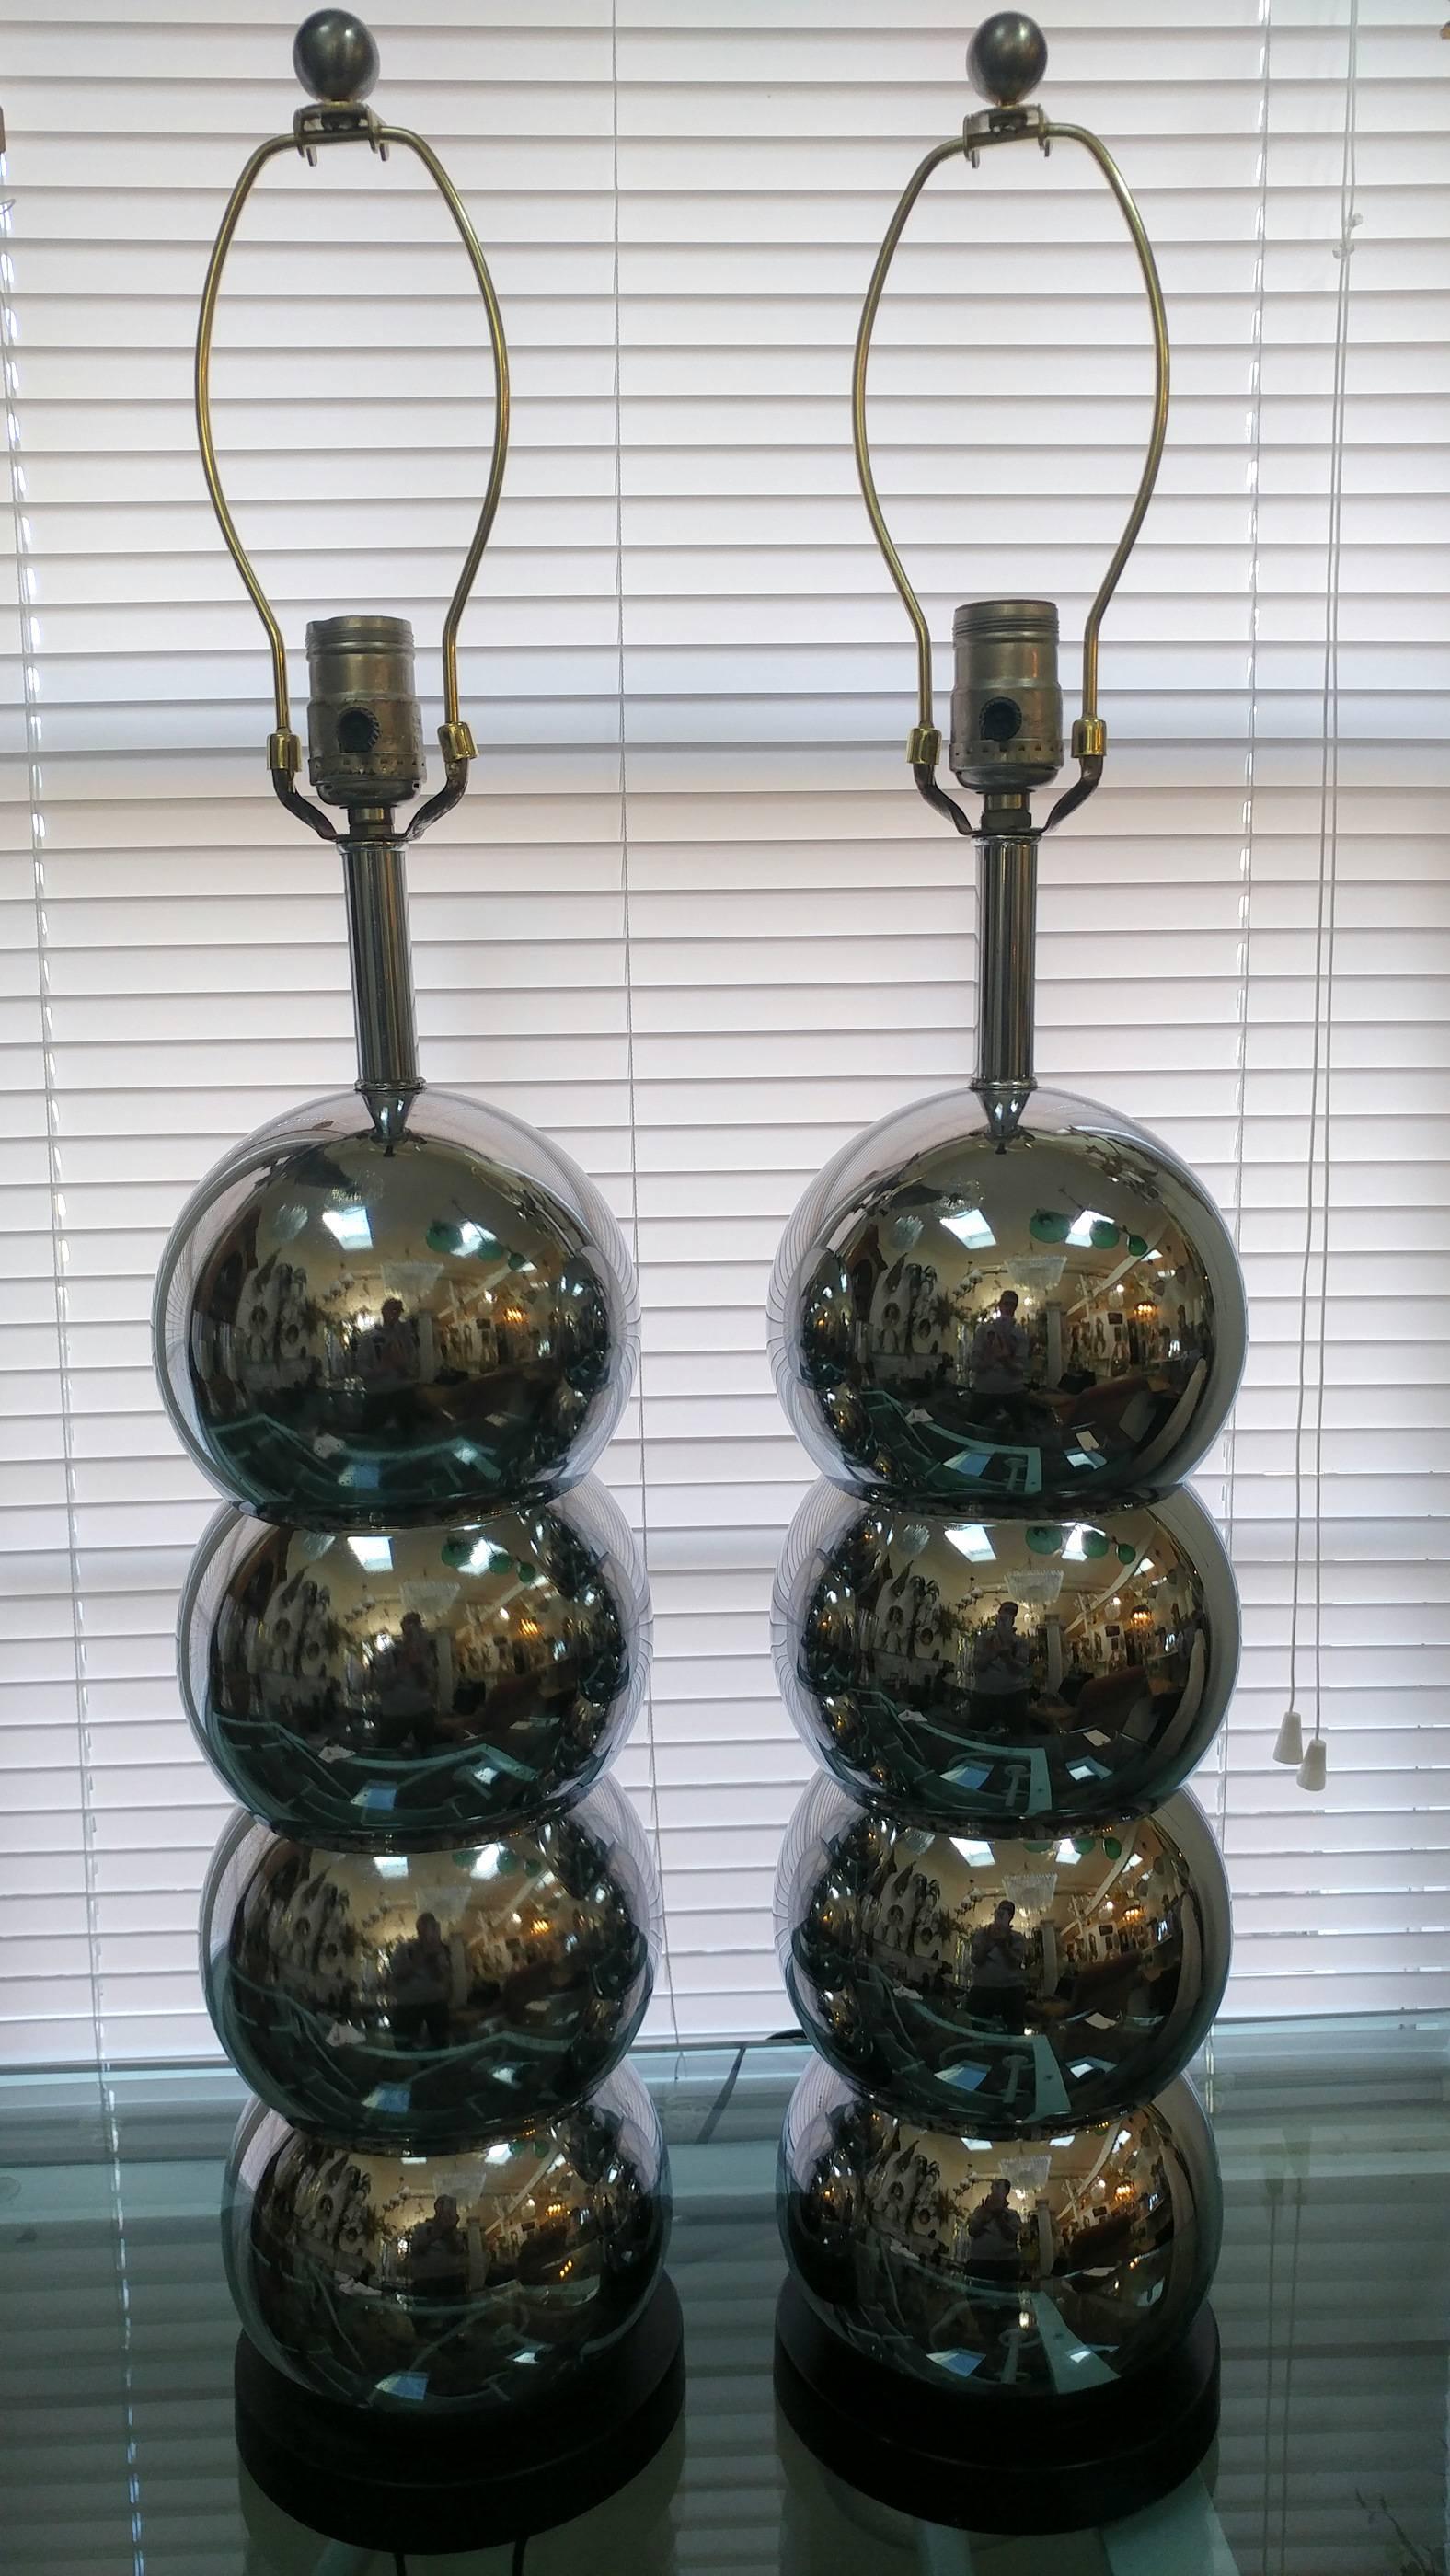 Lovely pair of mirror chrome stacked balls table lamps by George Kovacs, included pair of vintage custom handmade string shades by Hilo Steiner. These lamps are in exceptional vintage condition on black plinth base.